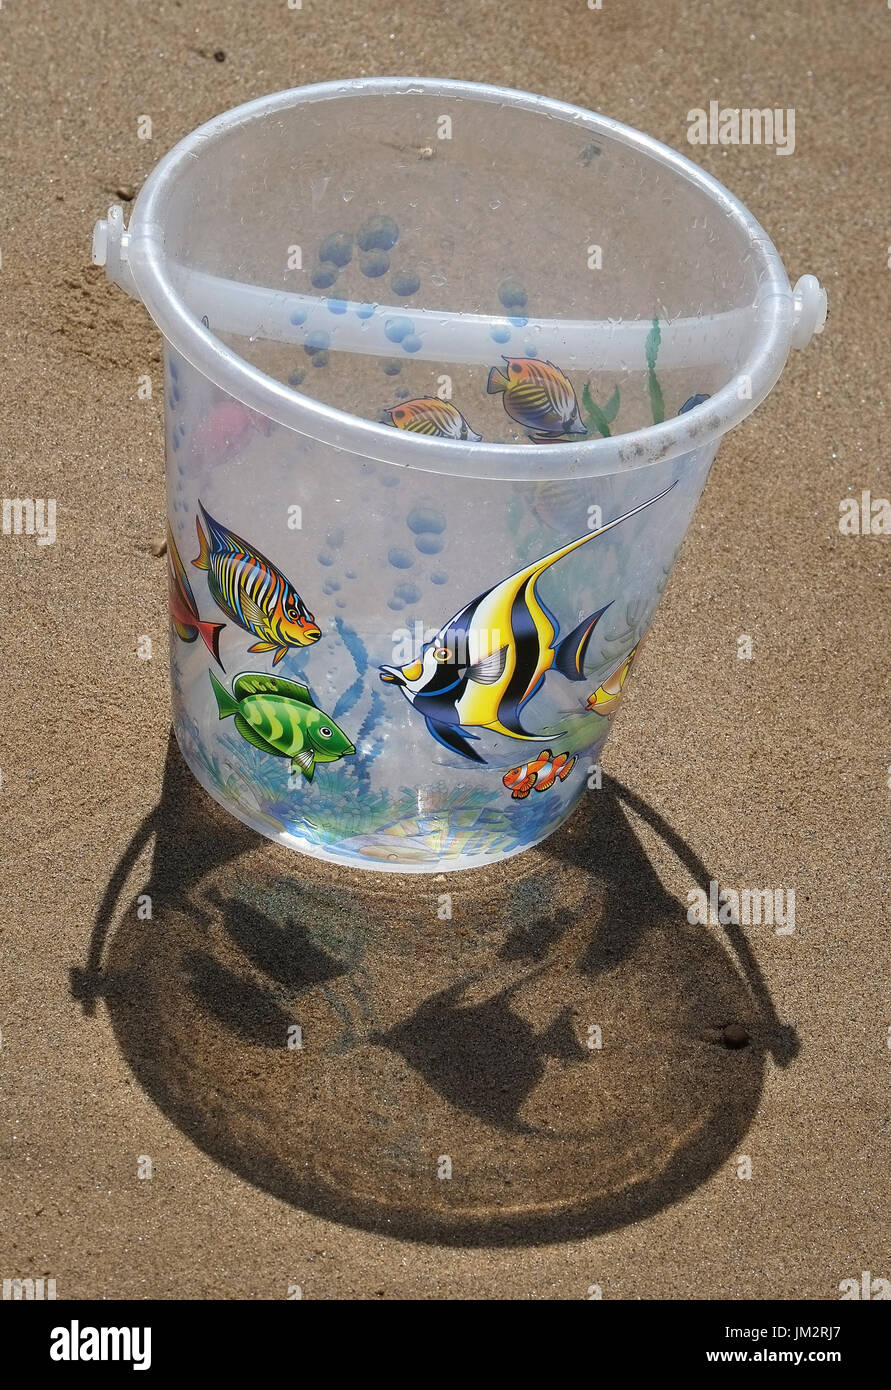 Child's Bucket in the sun with shadows. Stock Photo